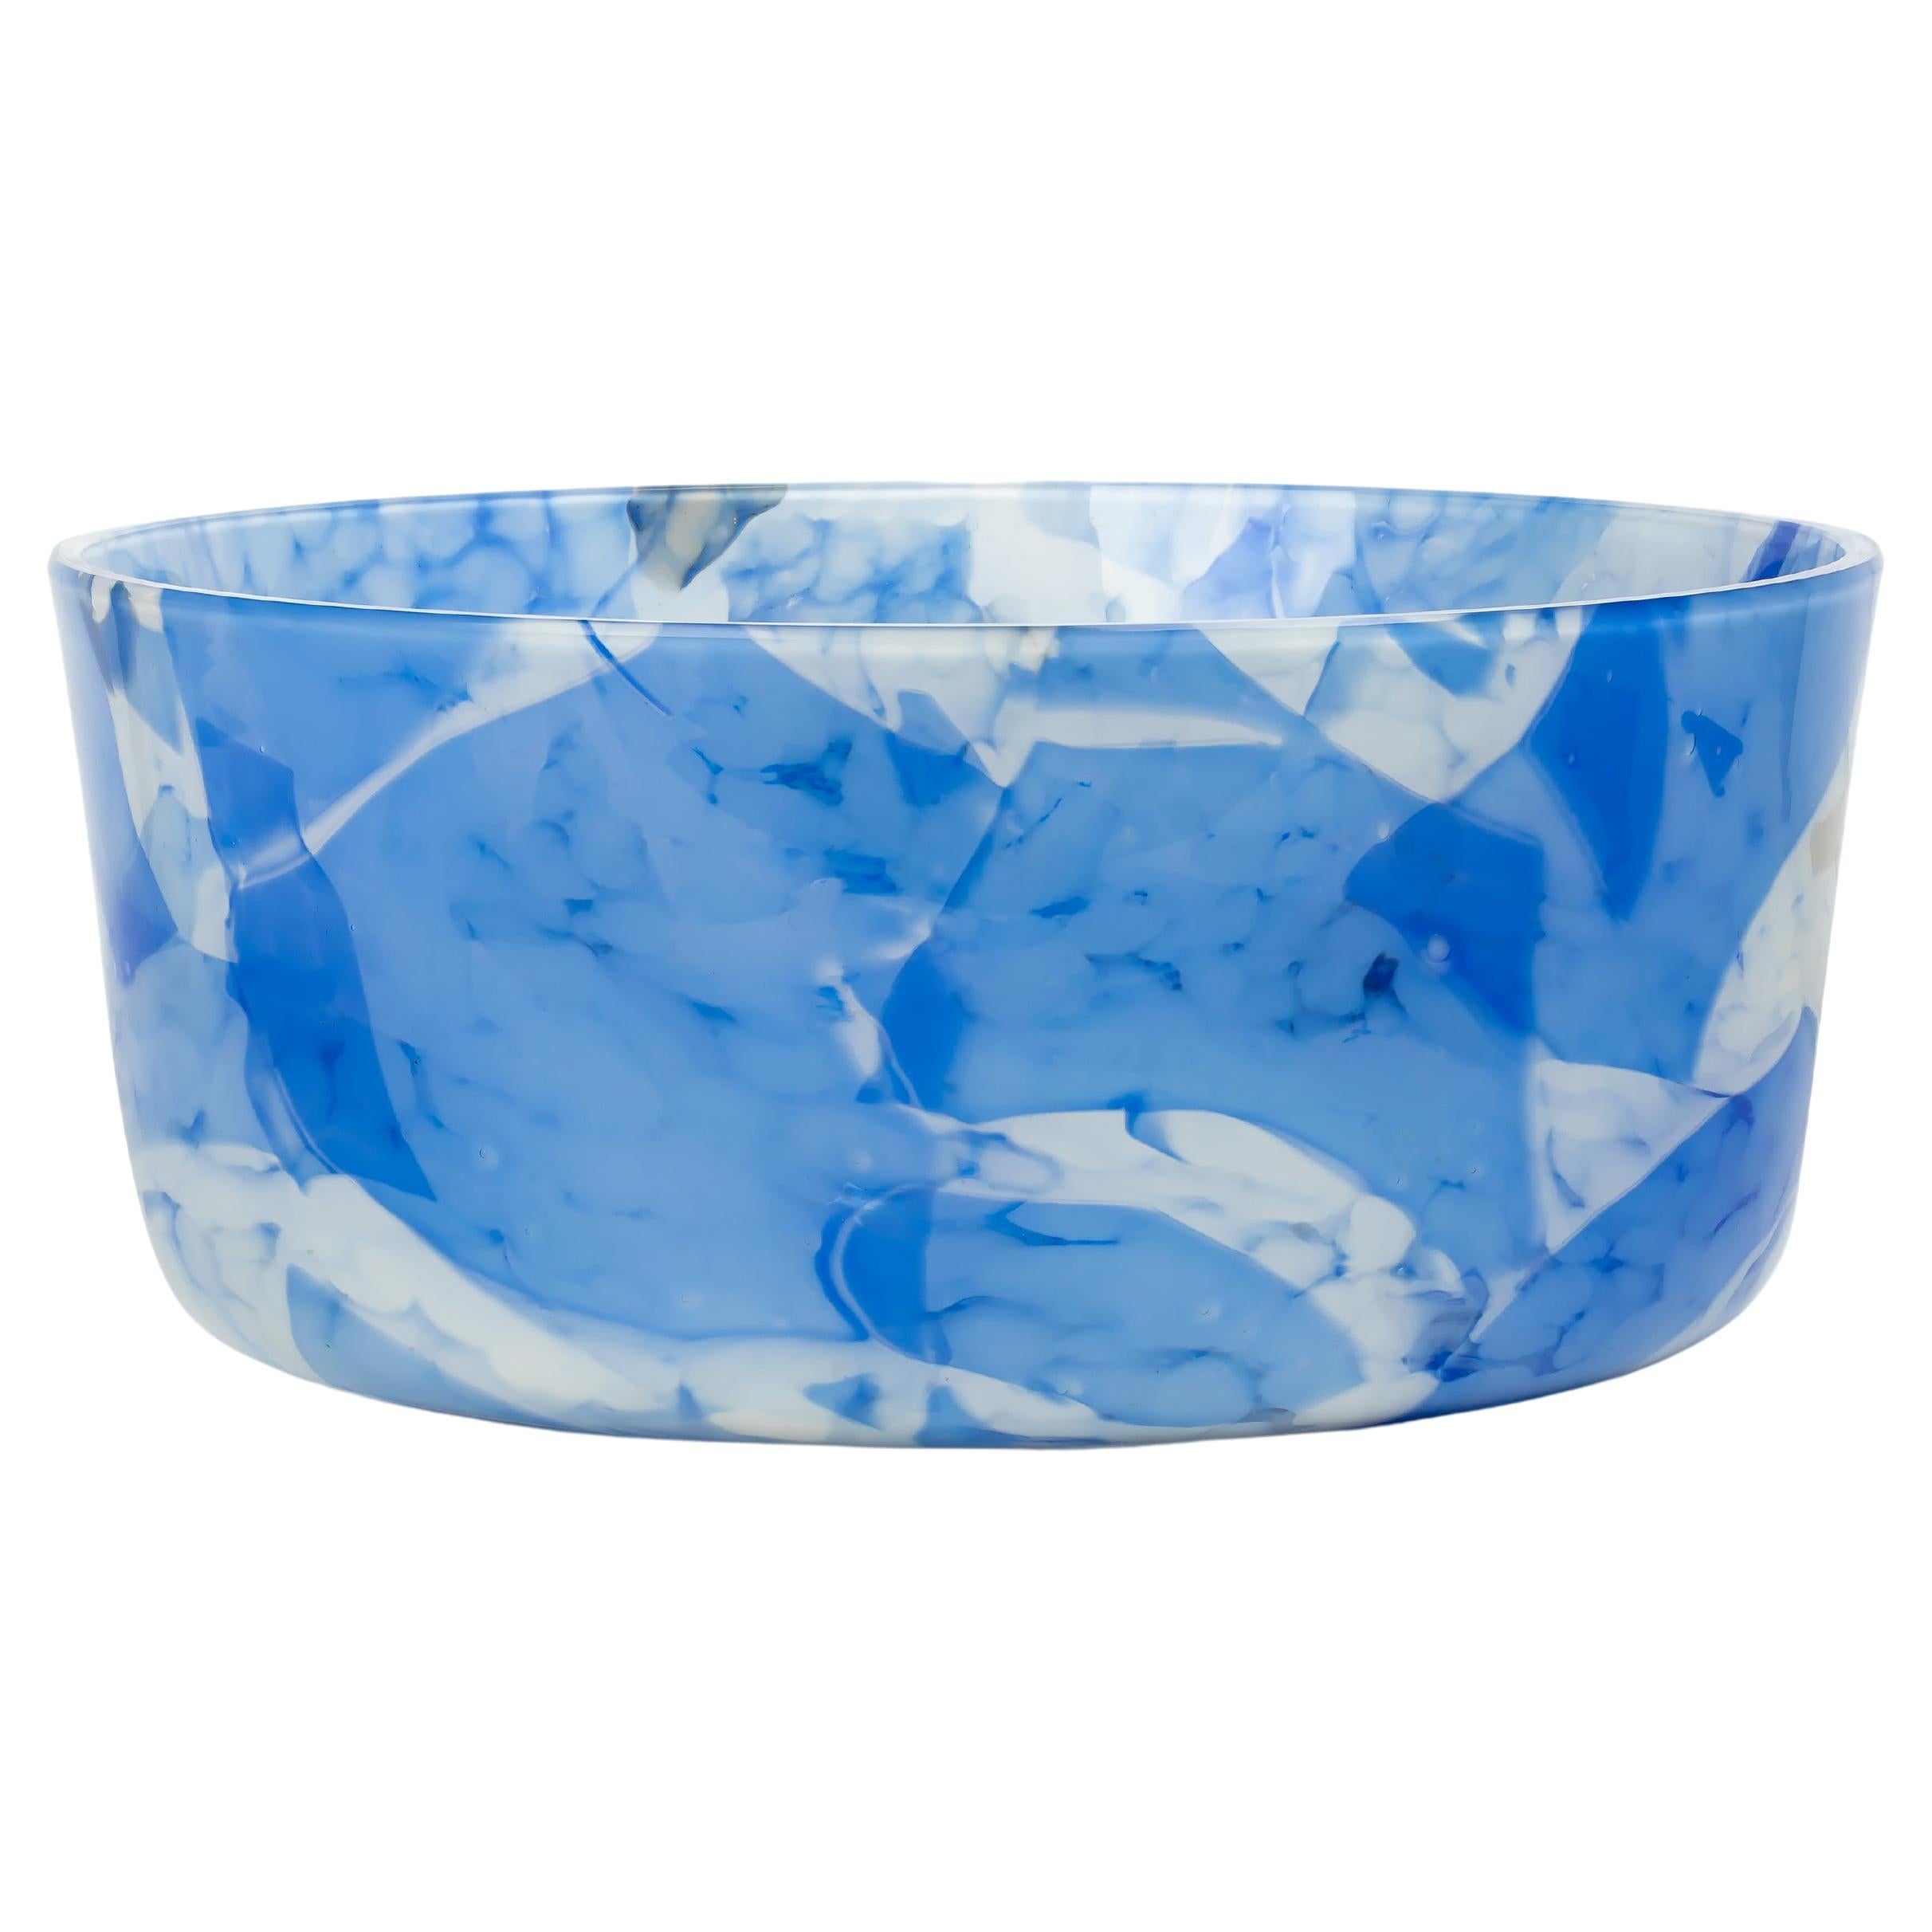 Our glass bowl is meticulously crafted by skilled artisans in Venice. Its stunning blue color effortlessly enchants the eyes, bringing a touch of sophistication to any space. Each bowl is meticulously formed using the ancient Murano glassblowing